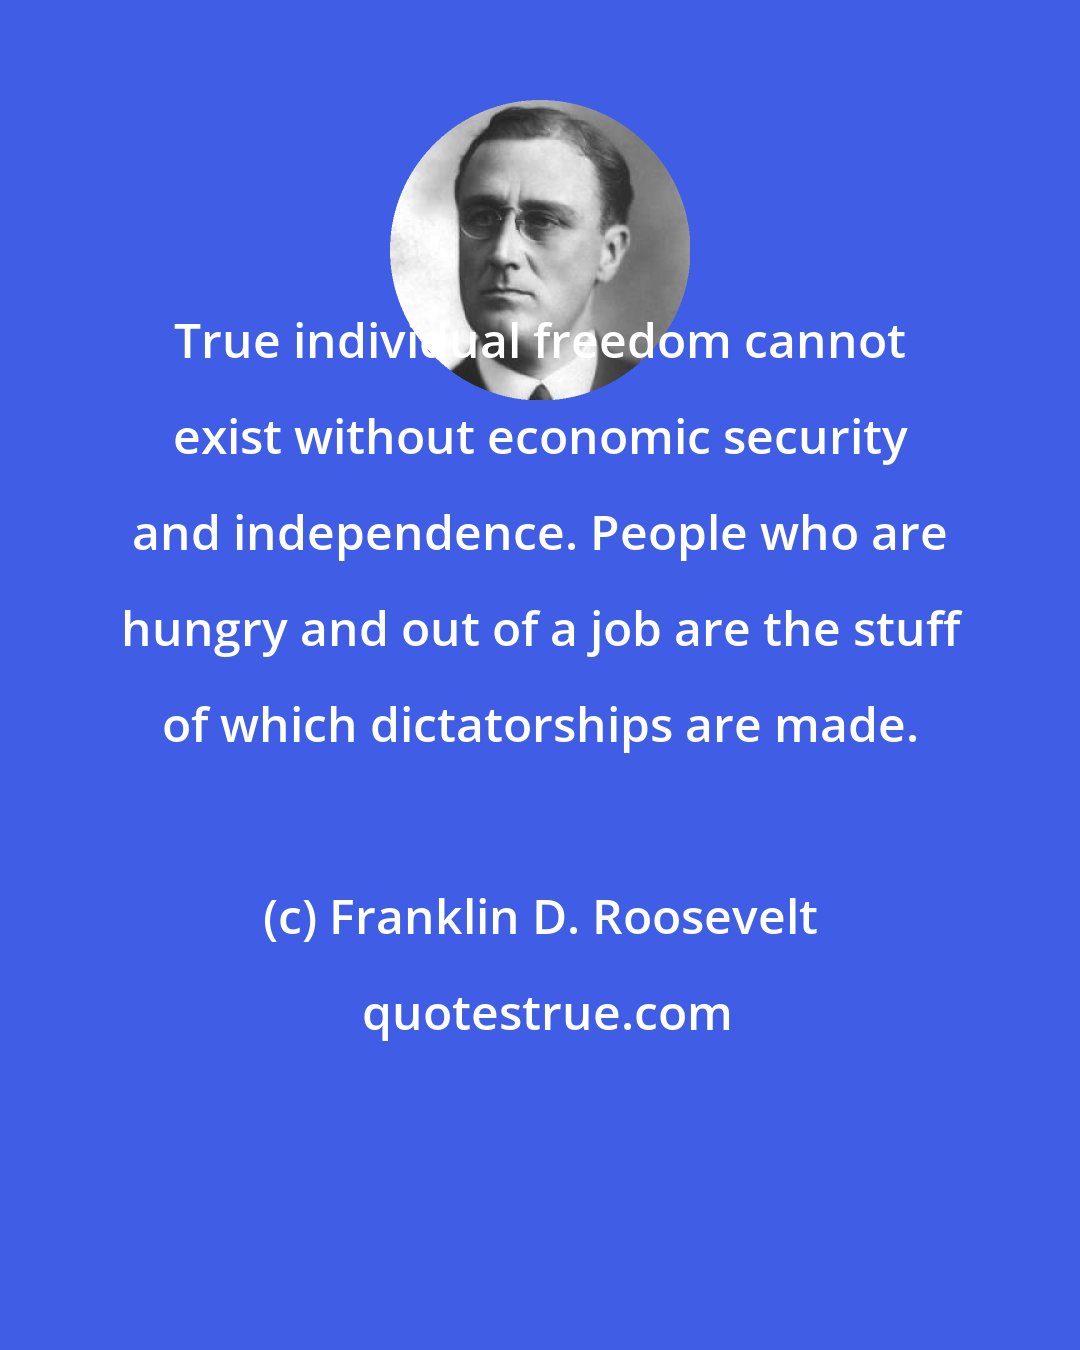 Franklin D. Roosevelt: True individual freedom cannot exist without economic security and independence. People who are hungry and out of a job are the stuff of which dictatorships are made.